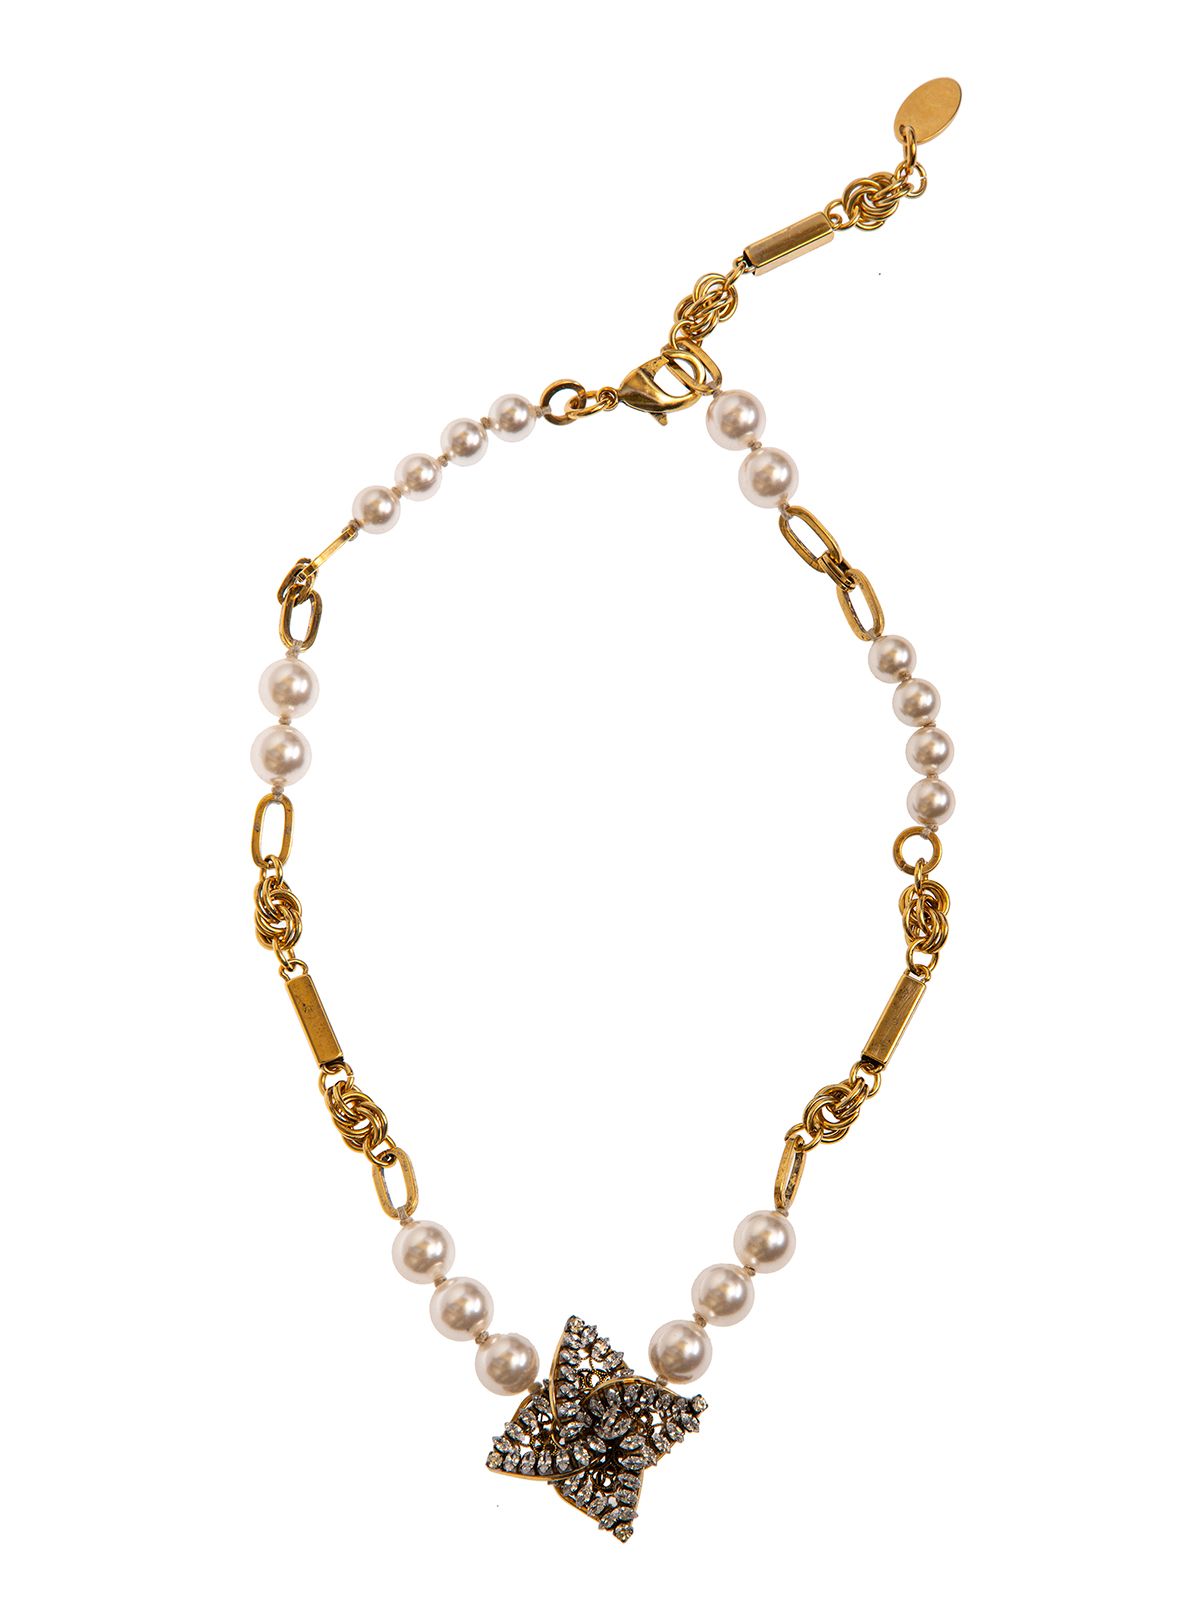 Pearl necklace with  jewel helix-shaped decoration embroidered with stones